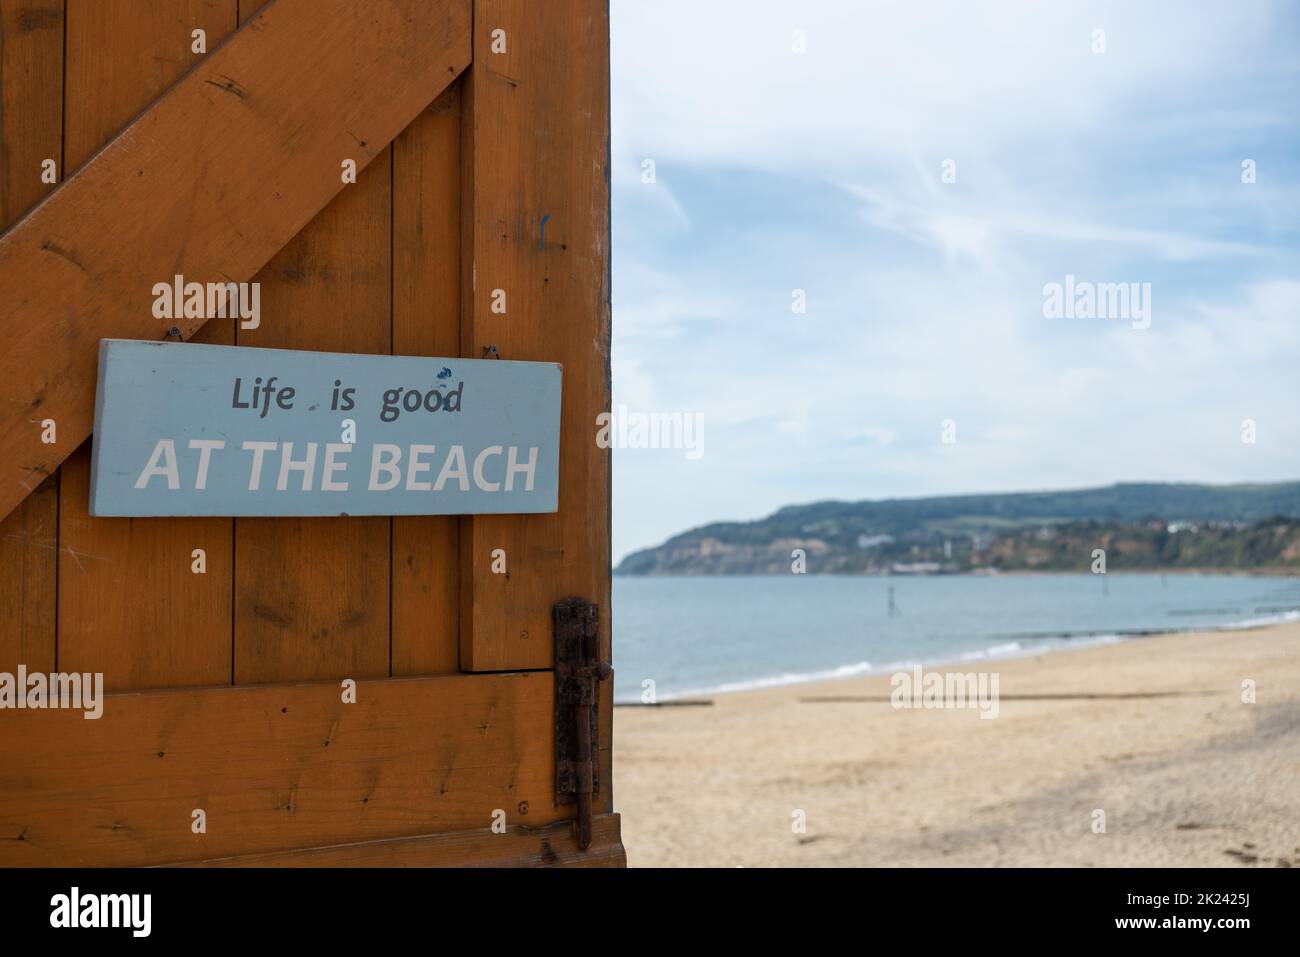 Life is good at the beach sign on a door with a beach out of focus behind it. Stock Photo